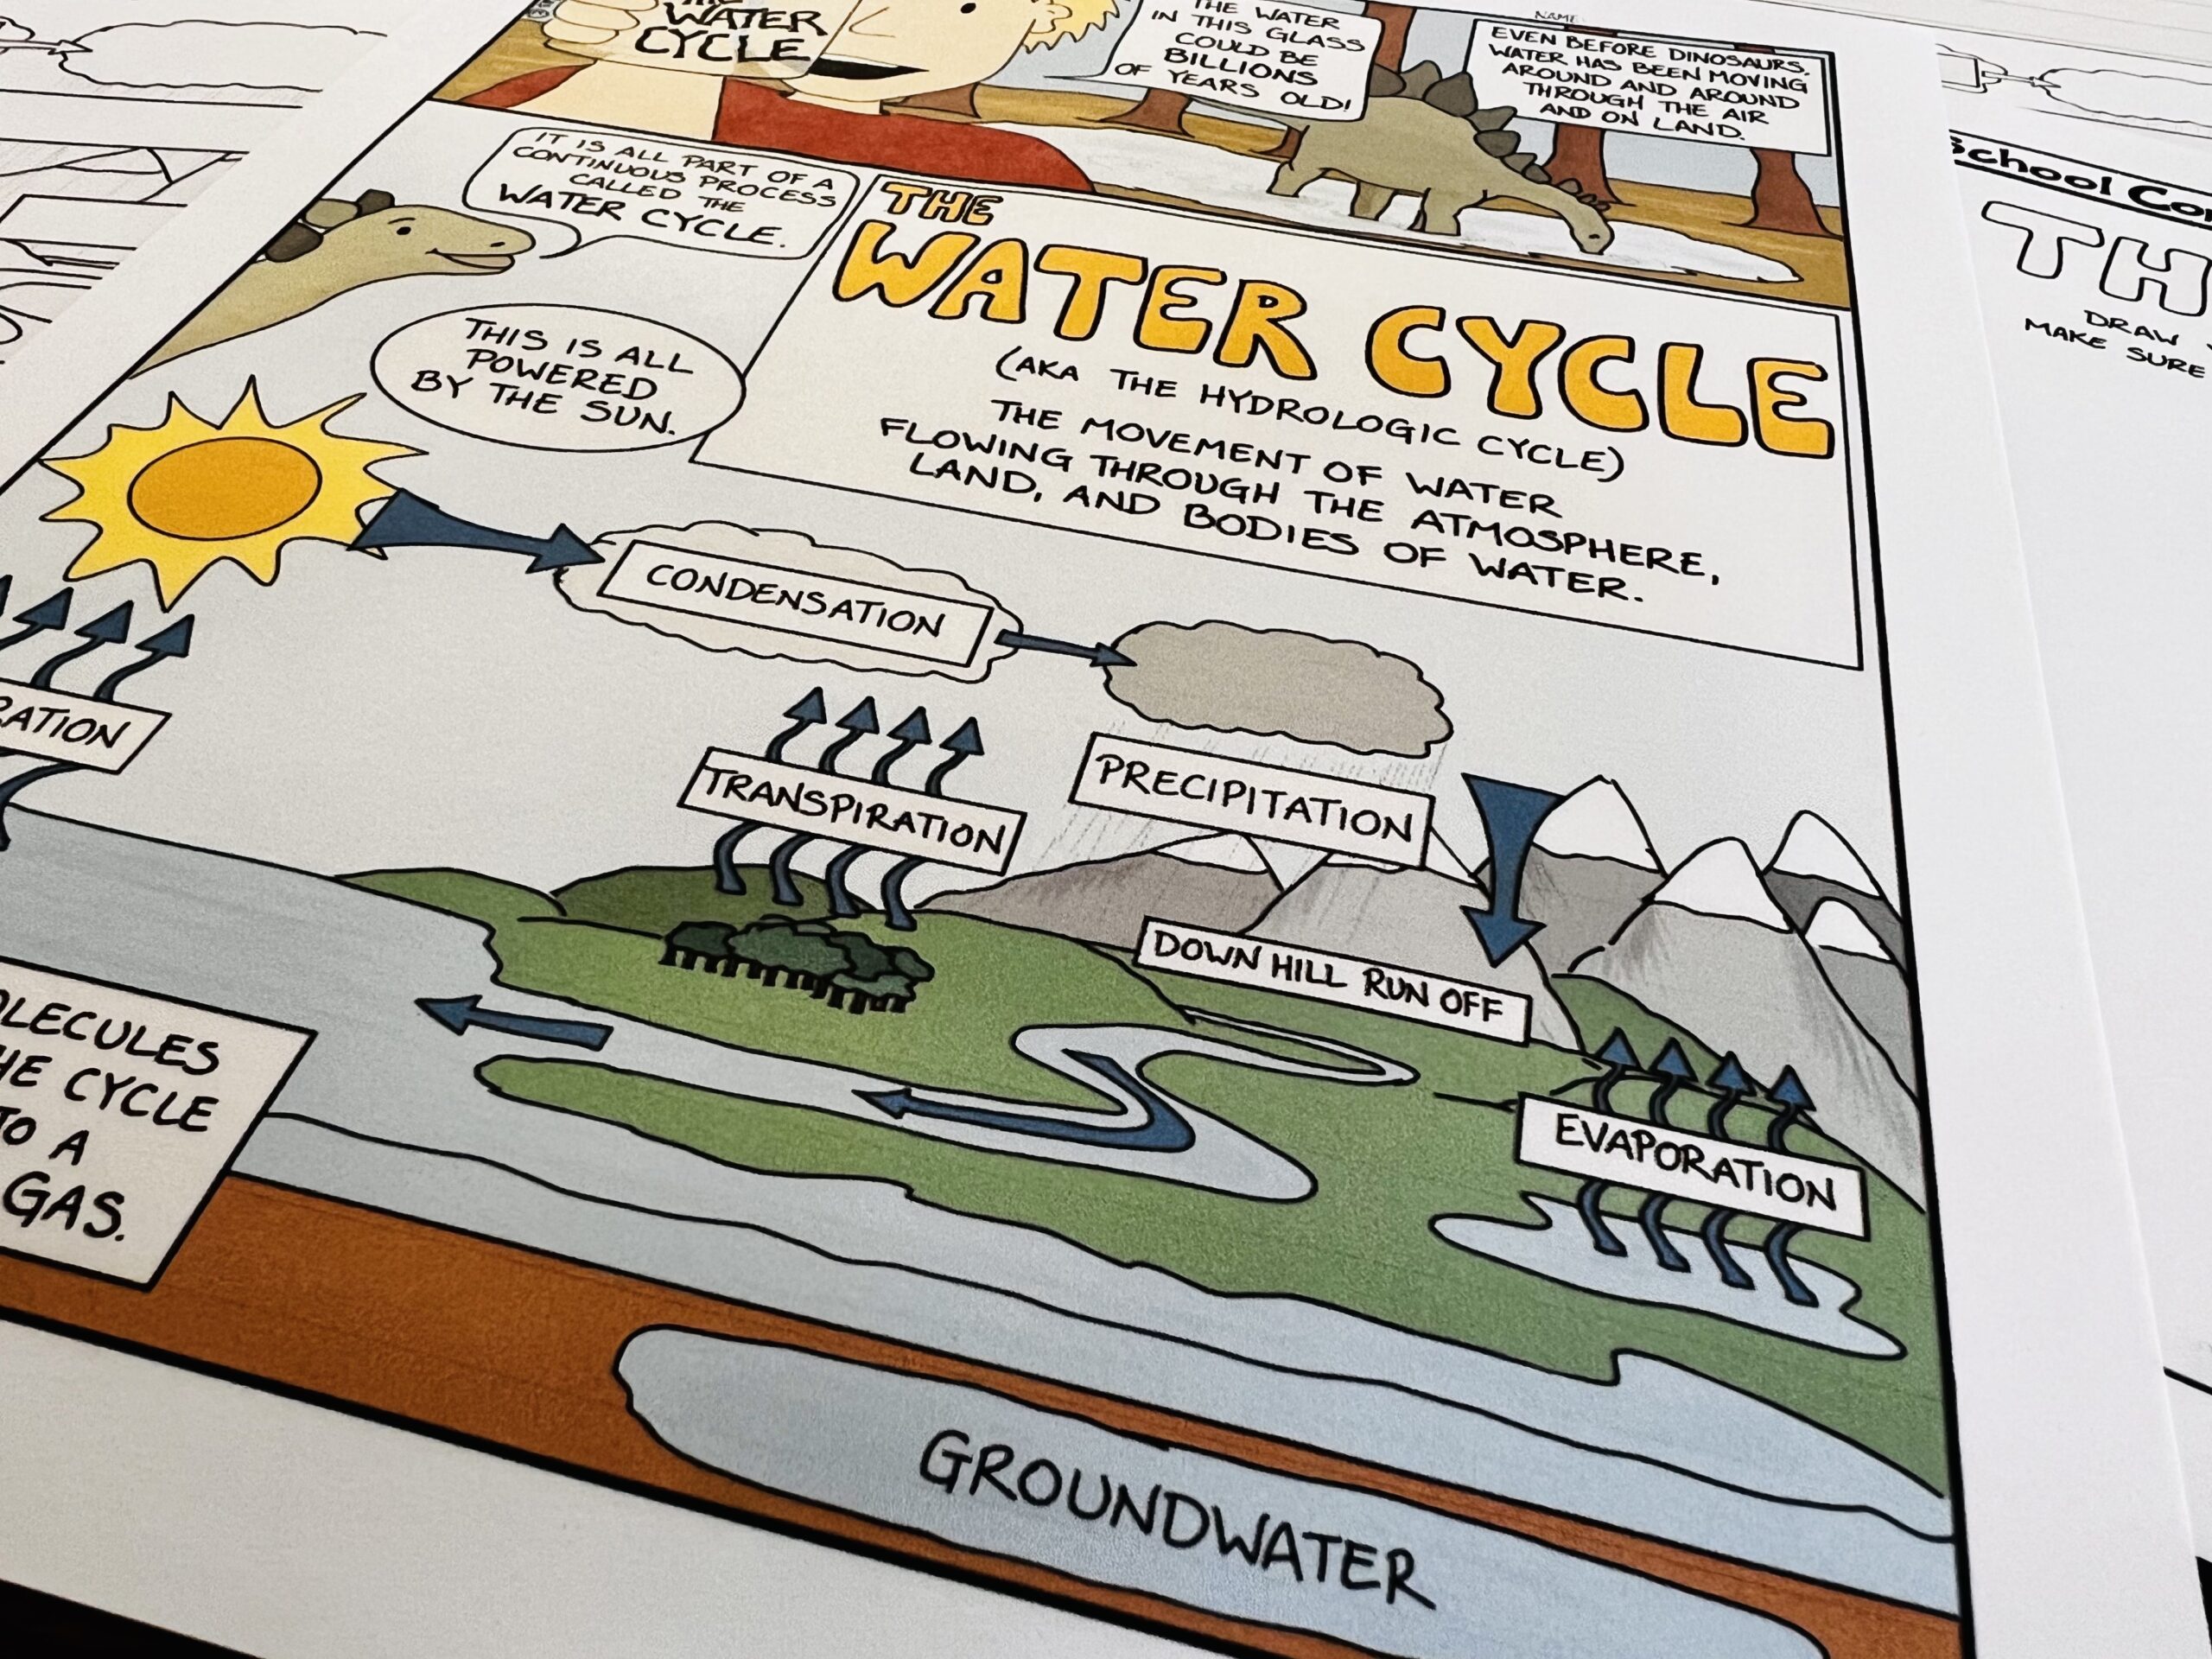 Image of the water cycle comic